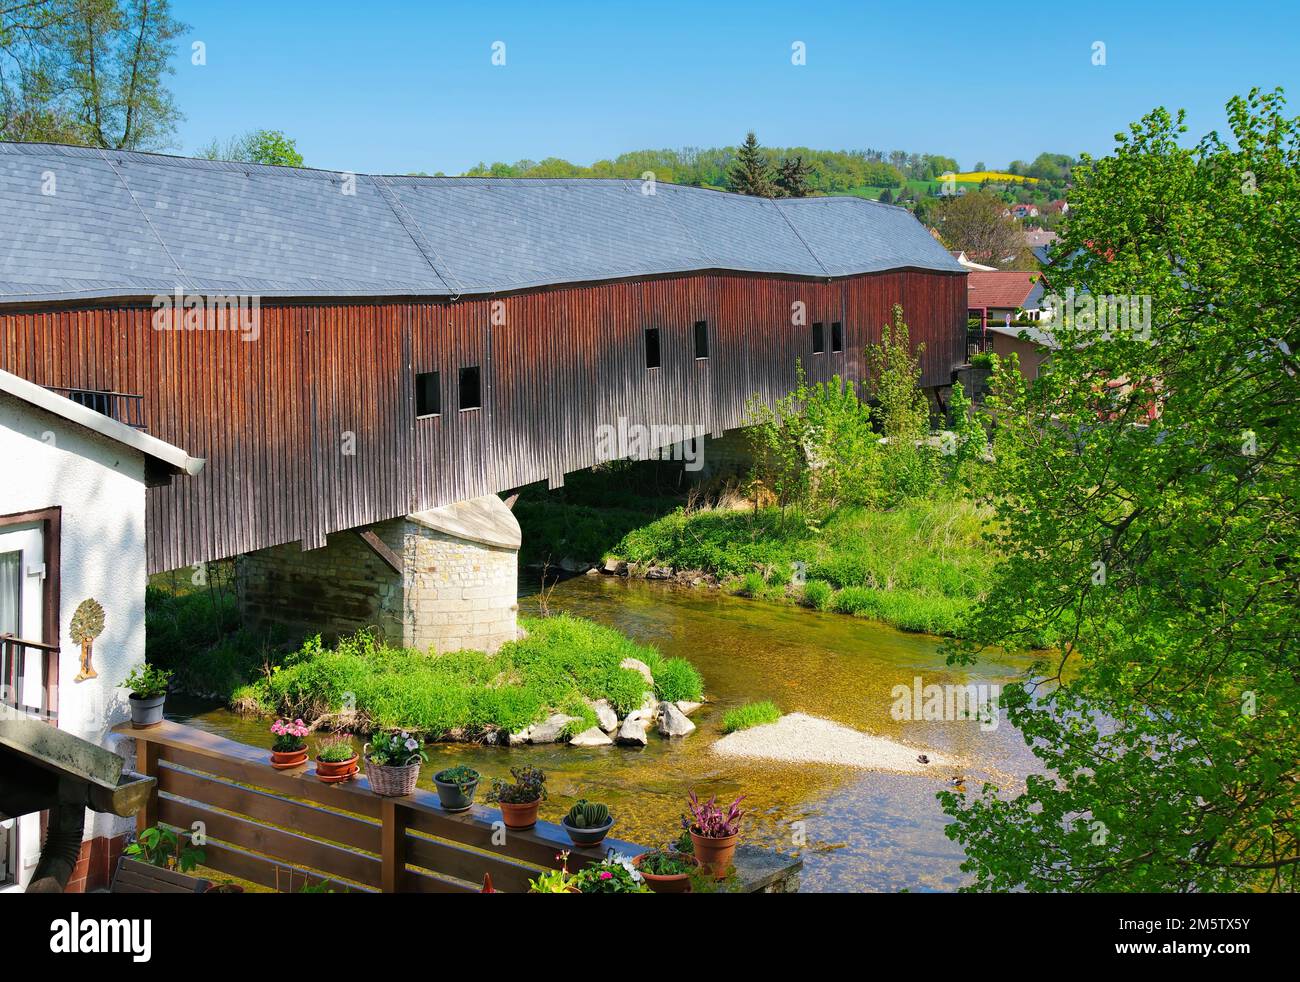 Wuenschendorf in the Vogtland over the Elster river, historic covered wooden bridge Stock Photo